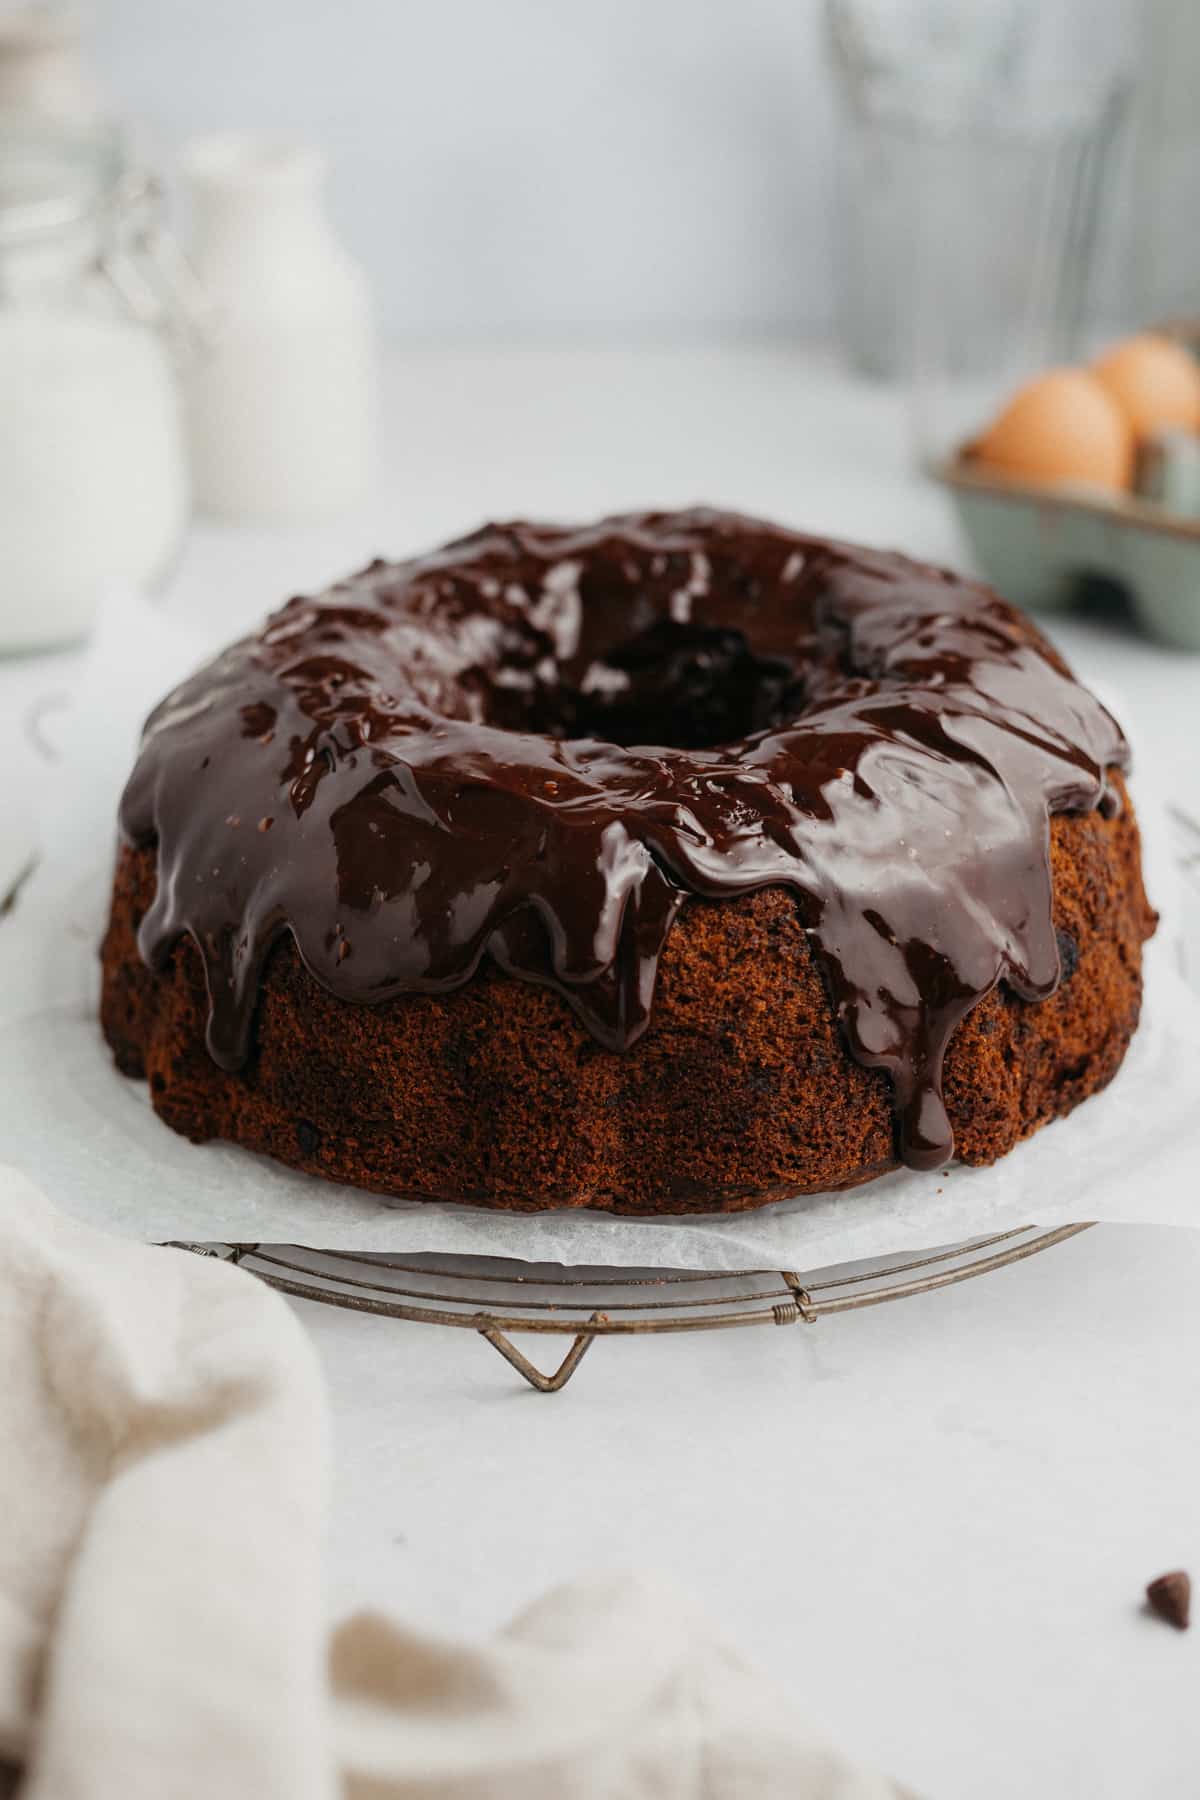 A bundt cake on parchment paper, the cake is covered in a dark chocolate ganache